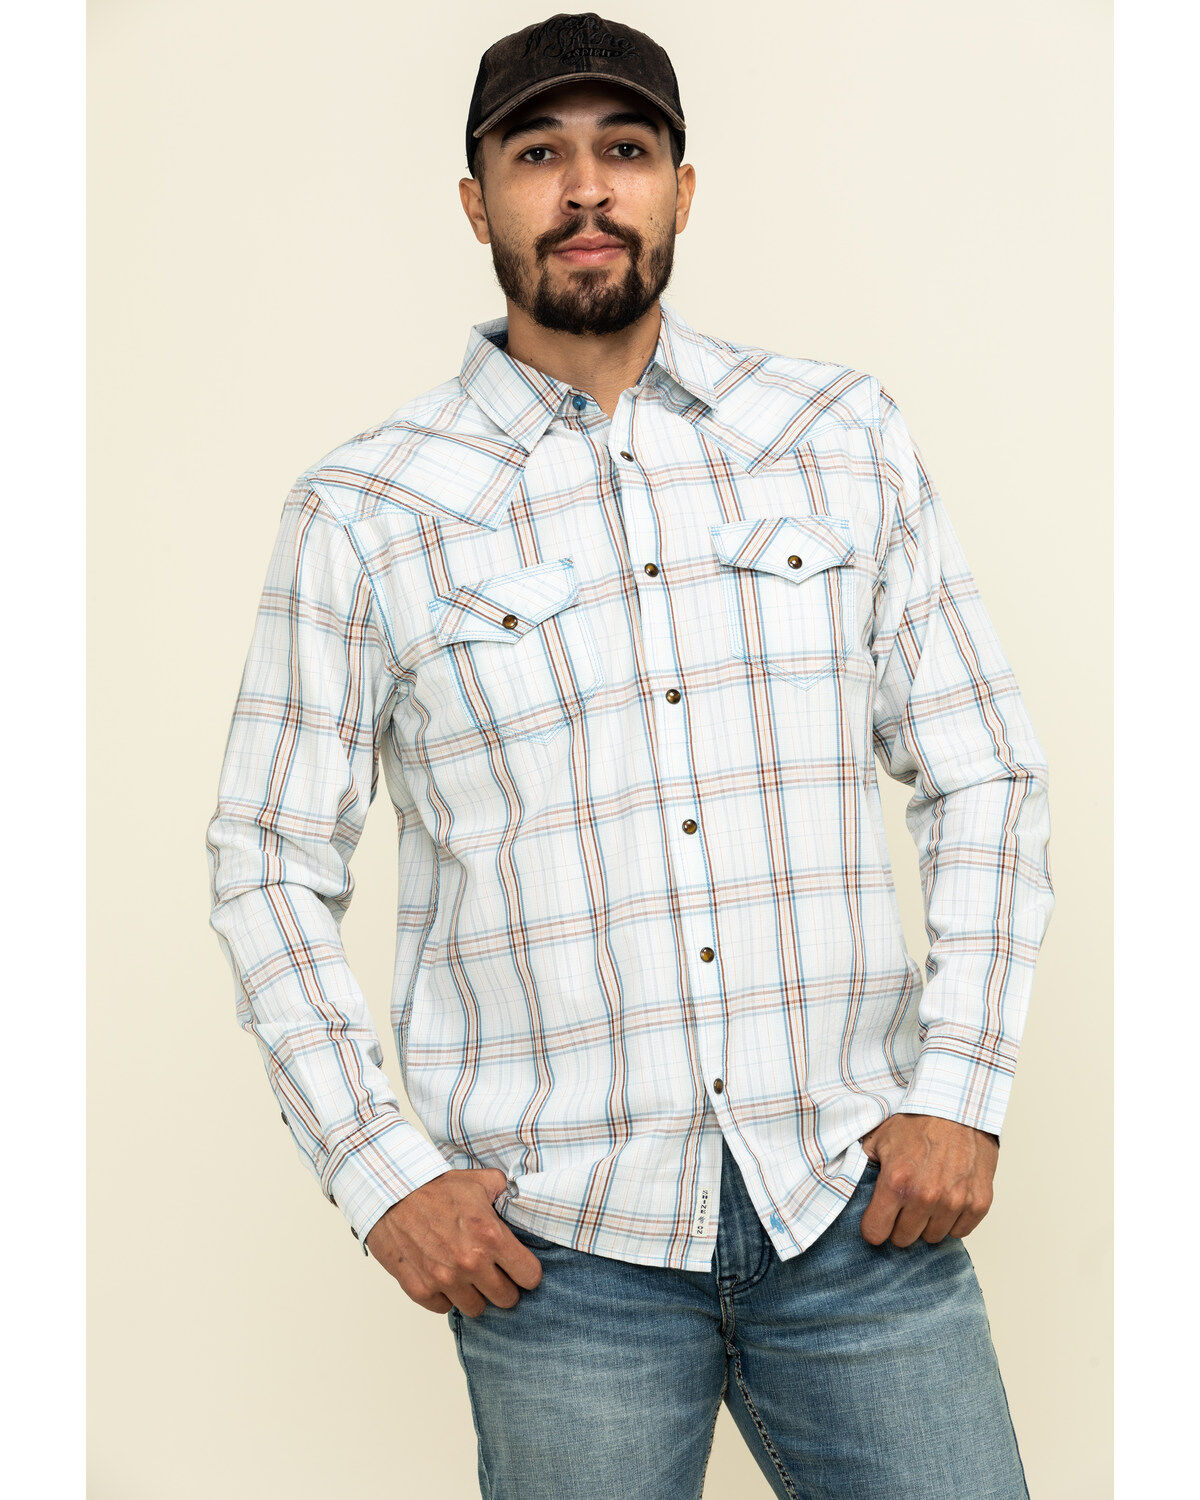 western style button up shirts